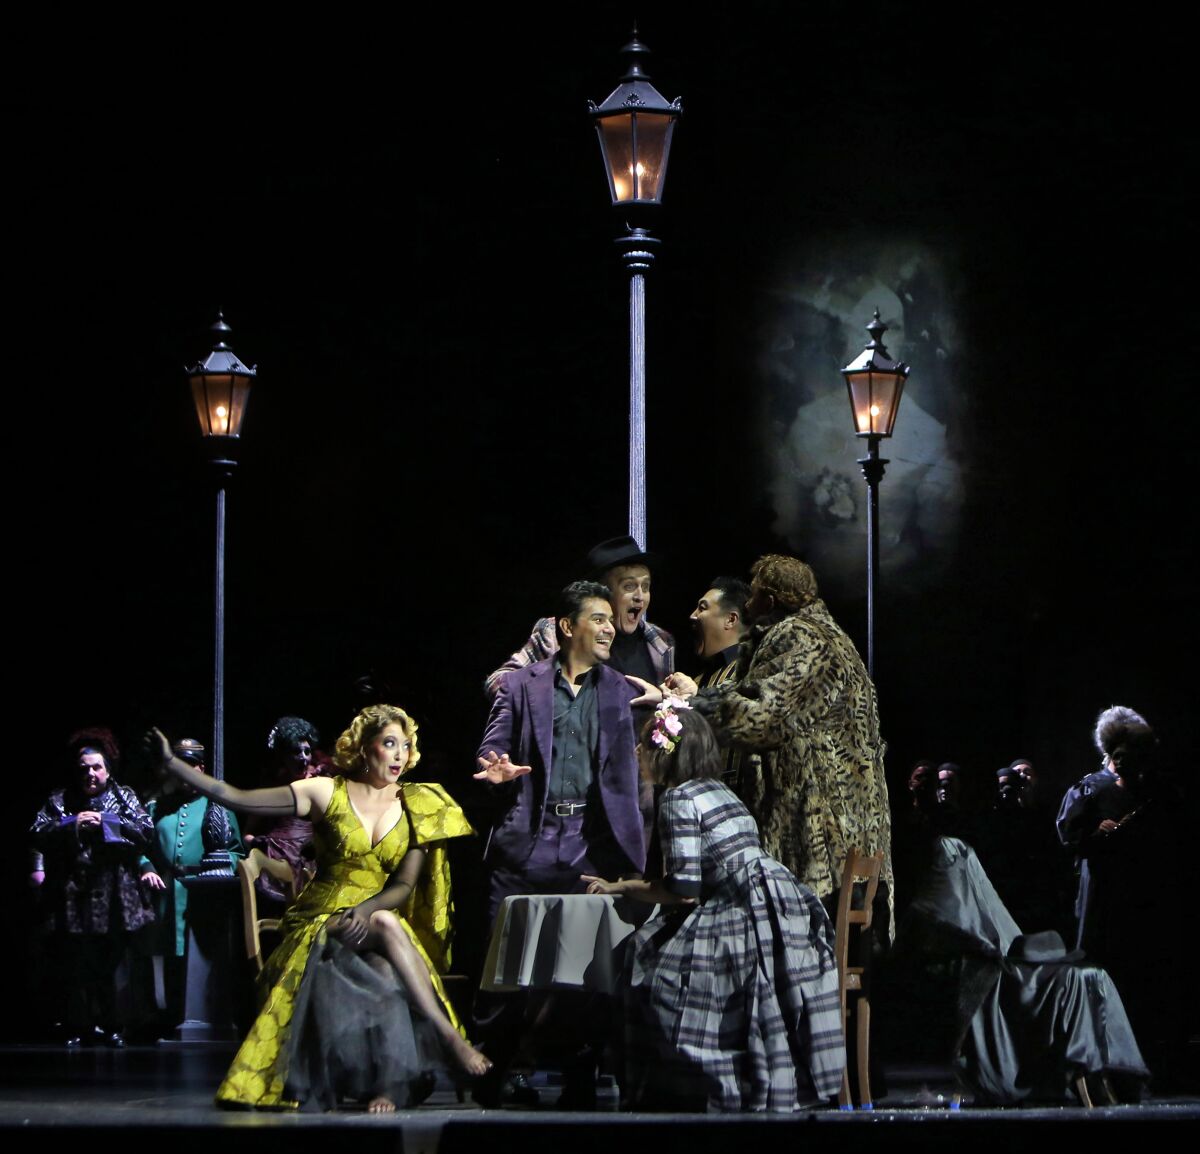 Erica Petrocelli is Musetta (seated left), Saimir Pirgu is Rodolfo (standing center with hand out) and Marina Costa-Jackson is Mimi (seated in plaid dress) in L.A. Opera's "La Bohéme" at the Dorothy Chandler Pavilion.